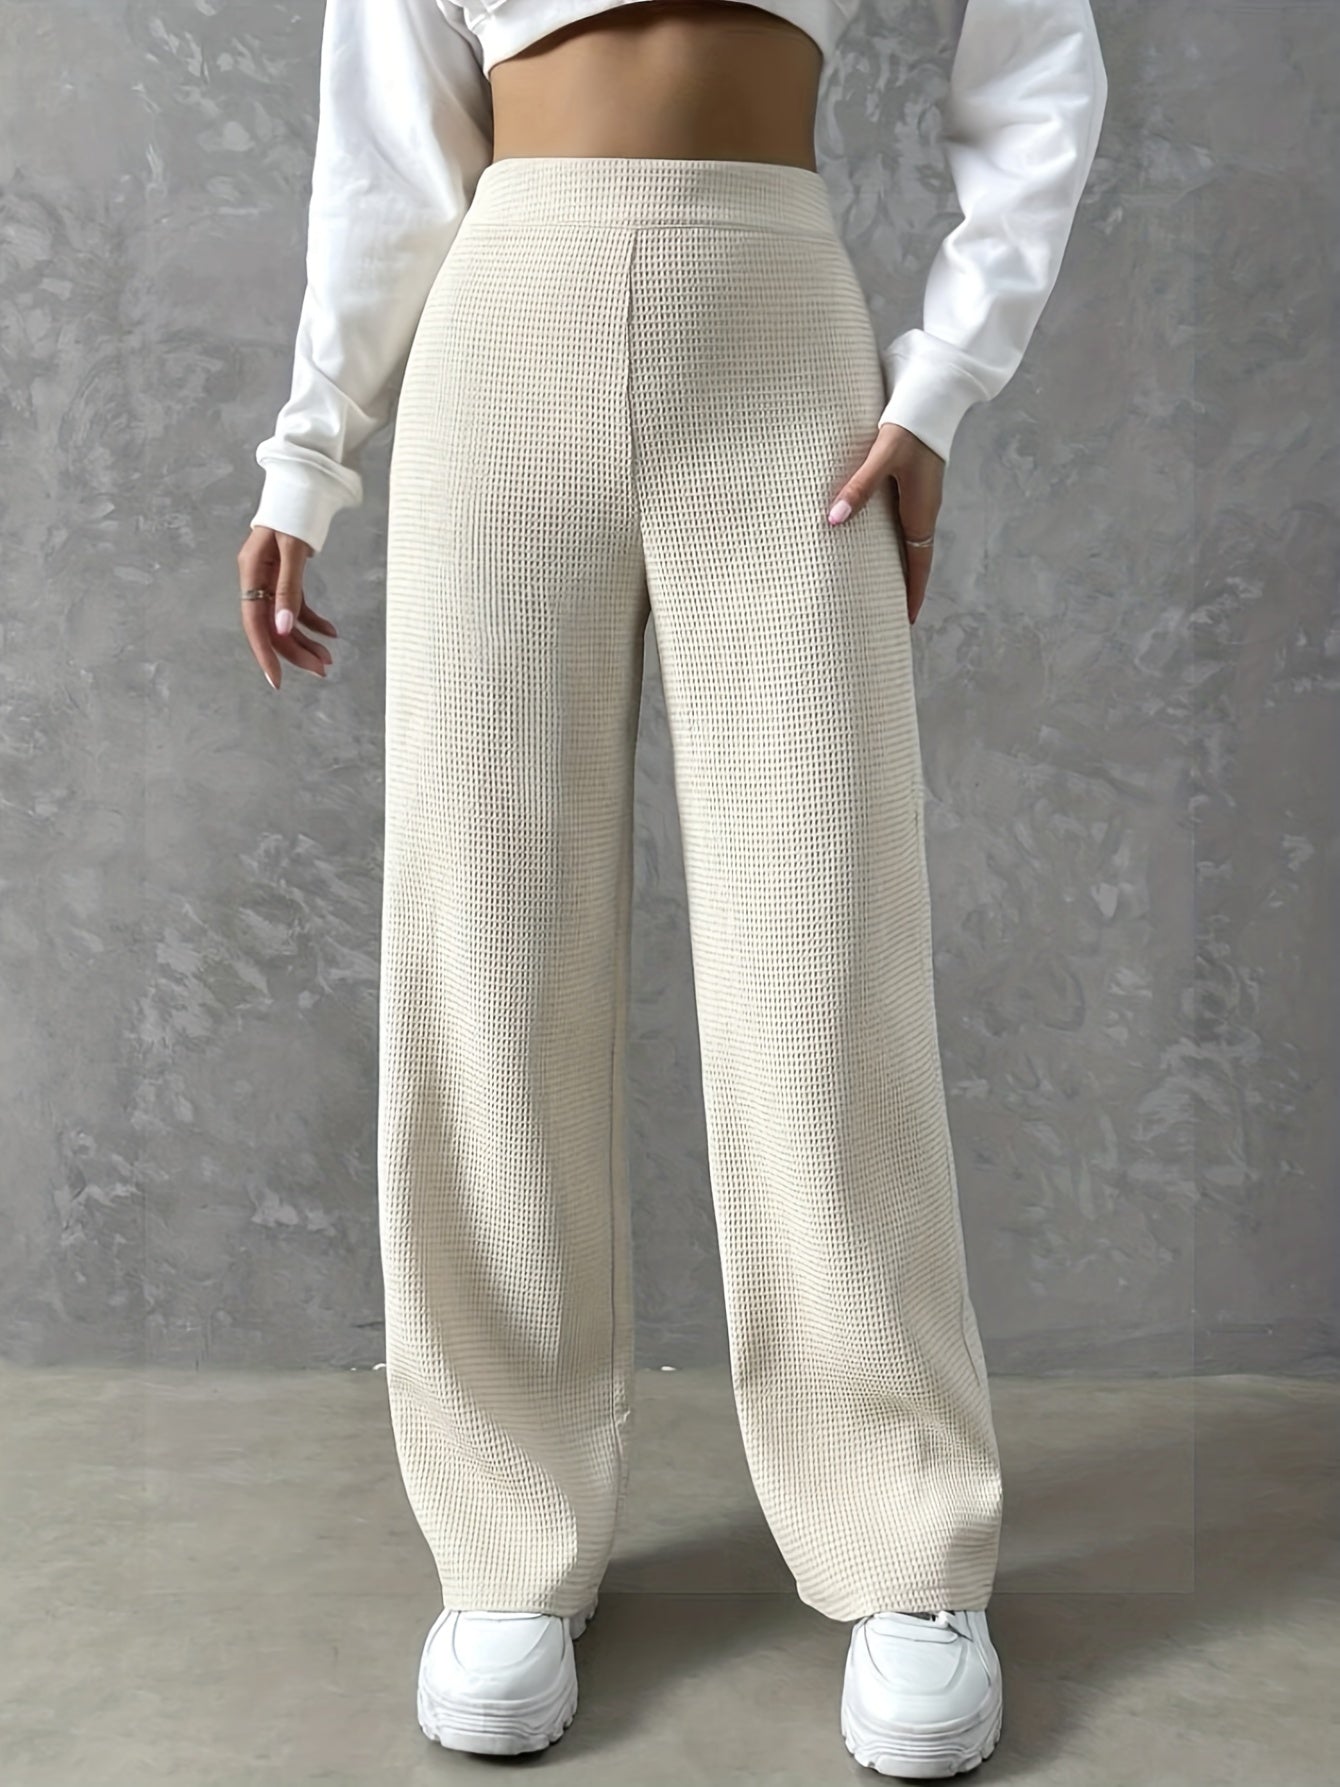 Antmvs Solid Textured High Waist Pants, Casual Wide Leg Comfy Pants, Women's Clothing